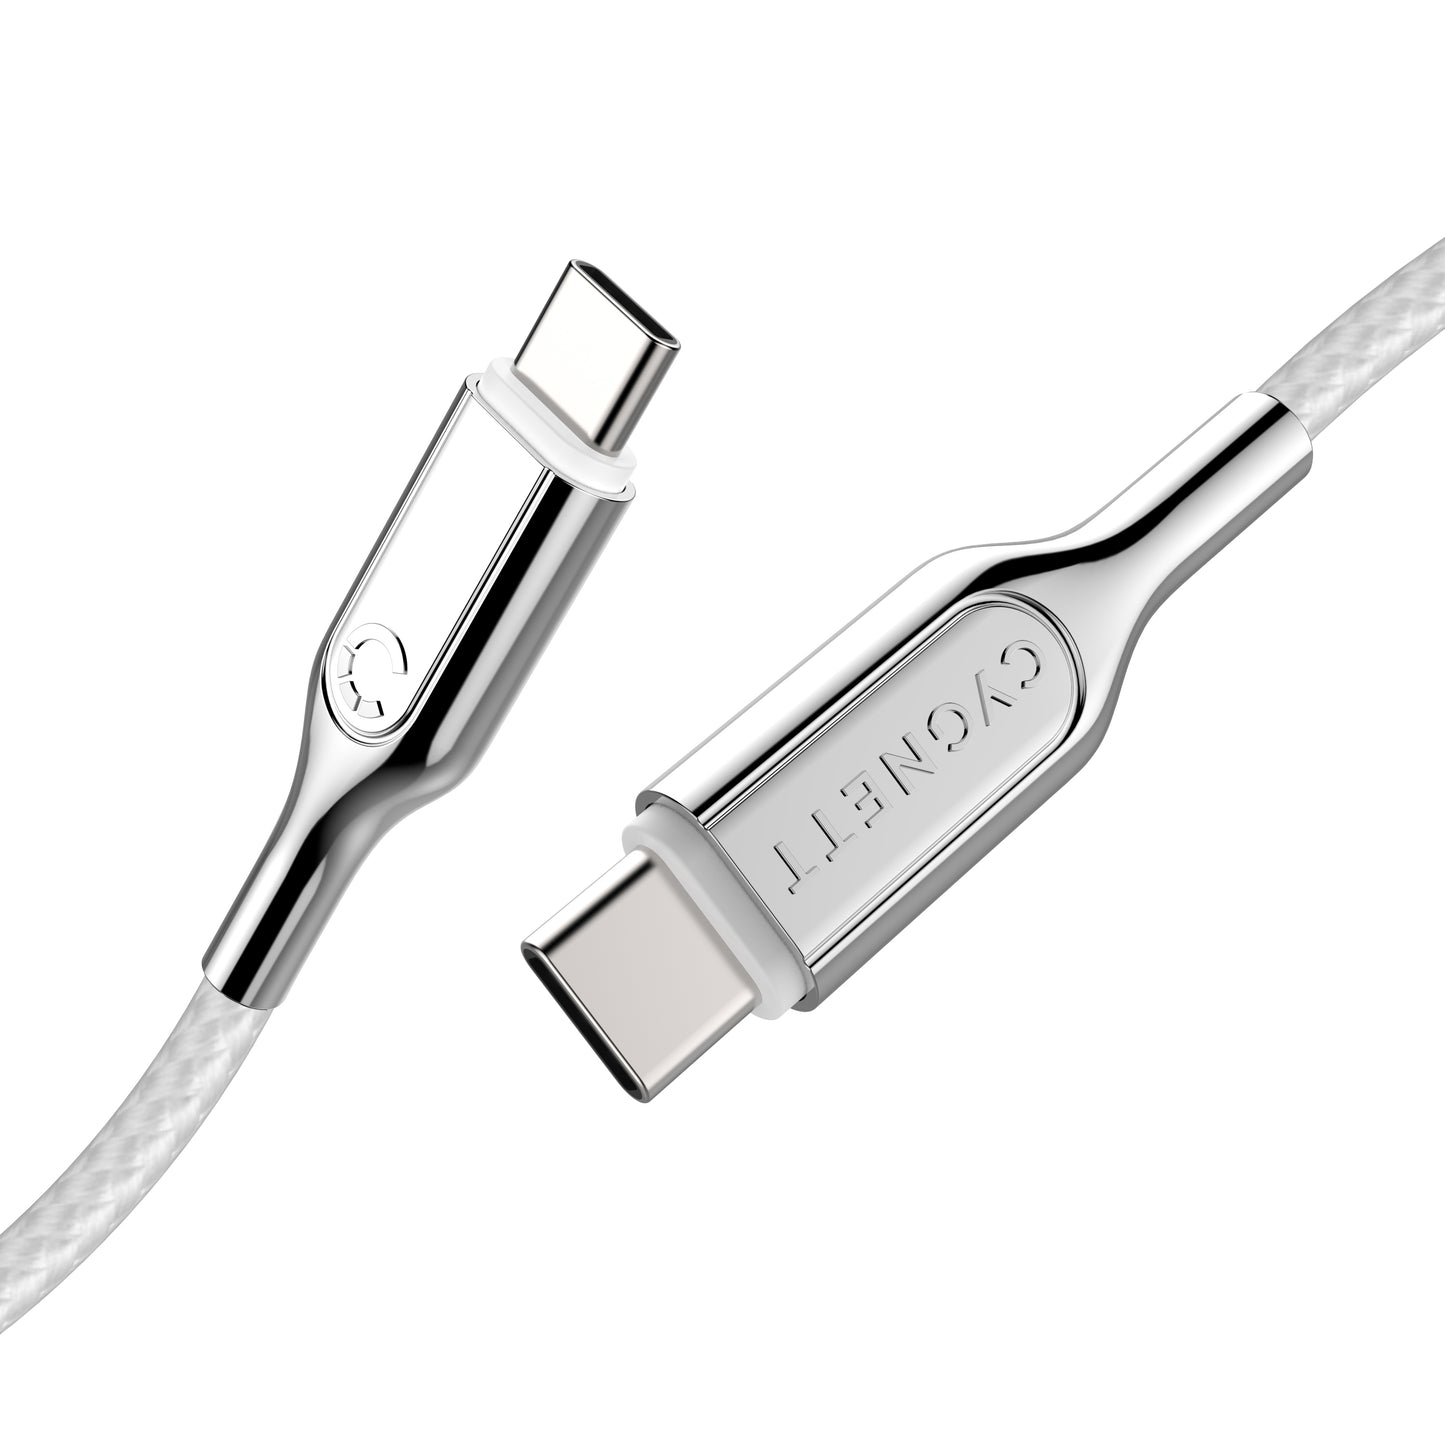 Cygnett Armoured 2.0 USB-C to USB-C (5A/100W) Cable 1M (White)